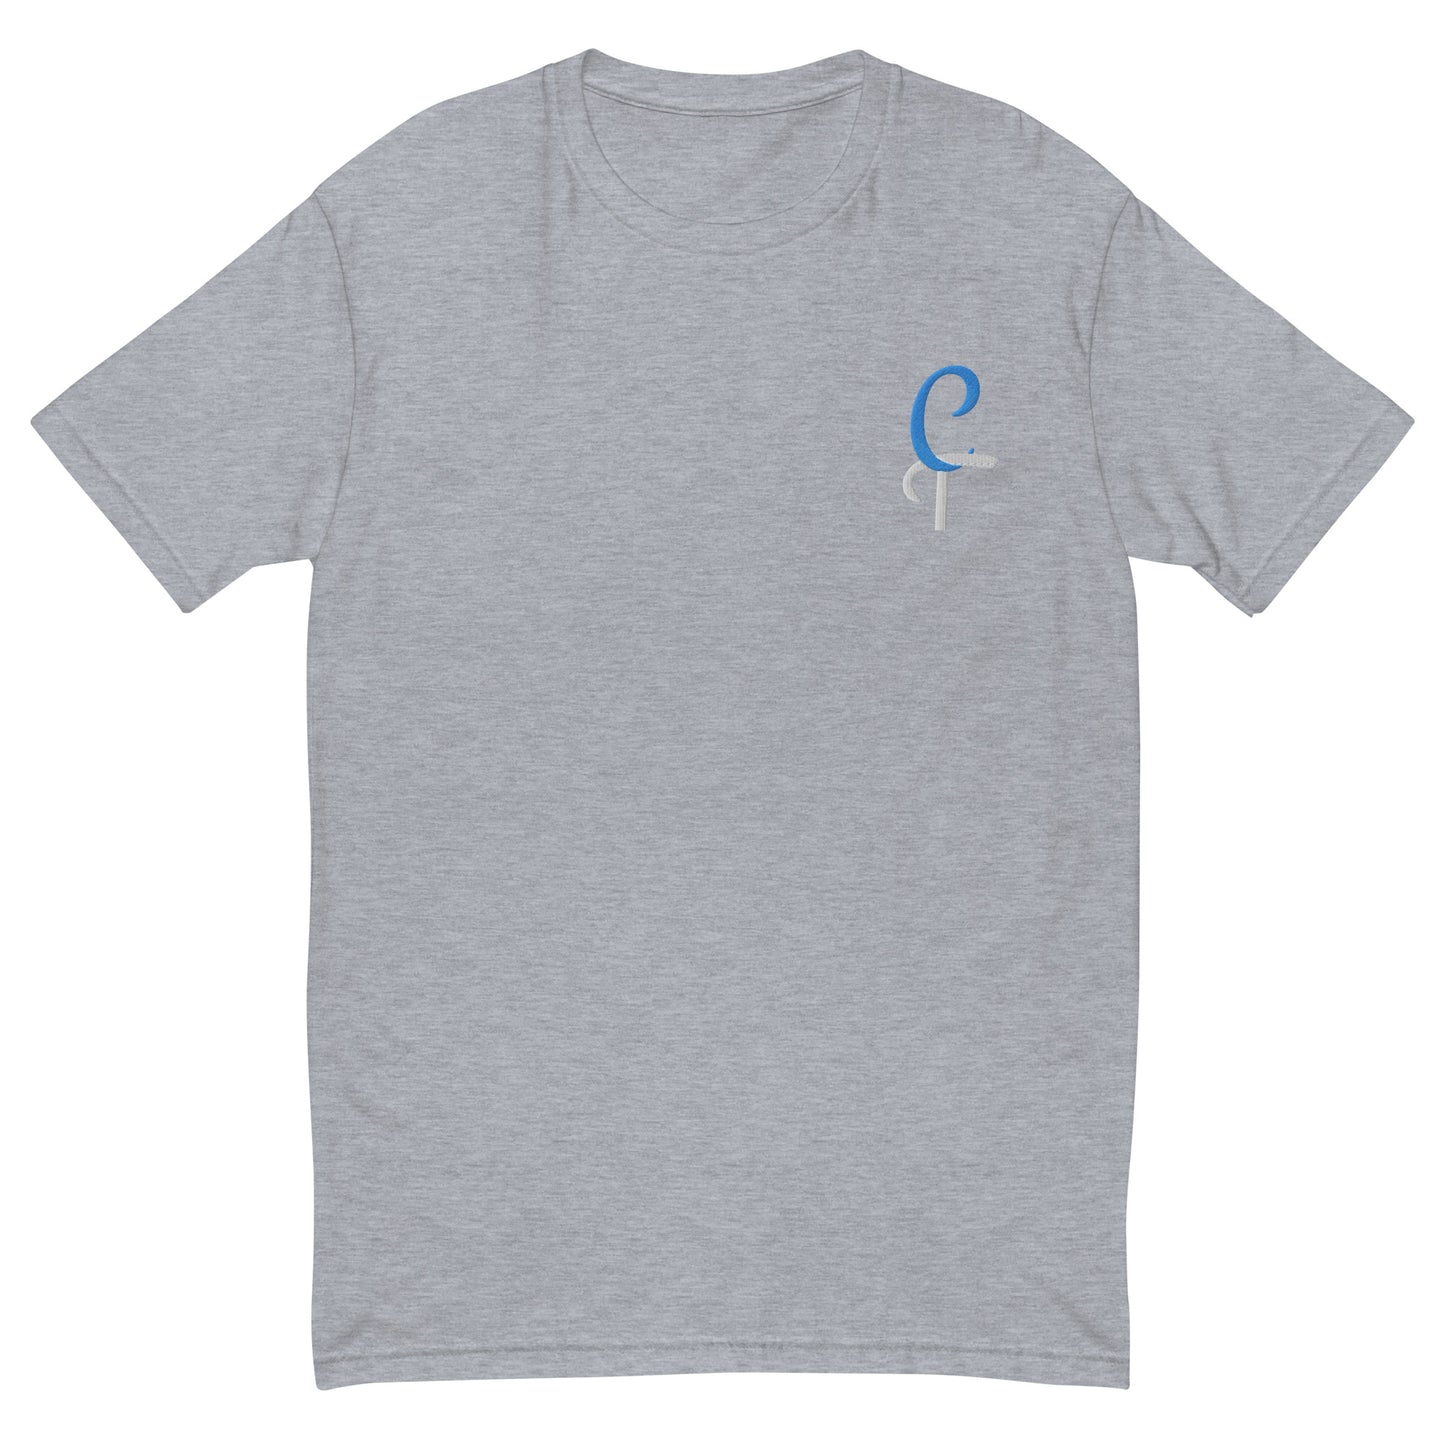 Men's Embroidered Comfy Tee